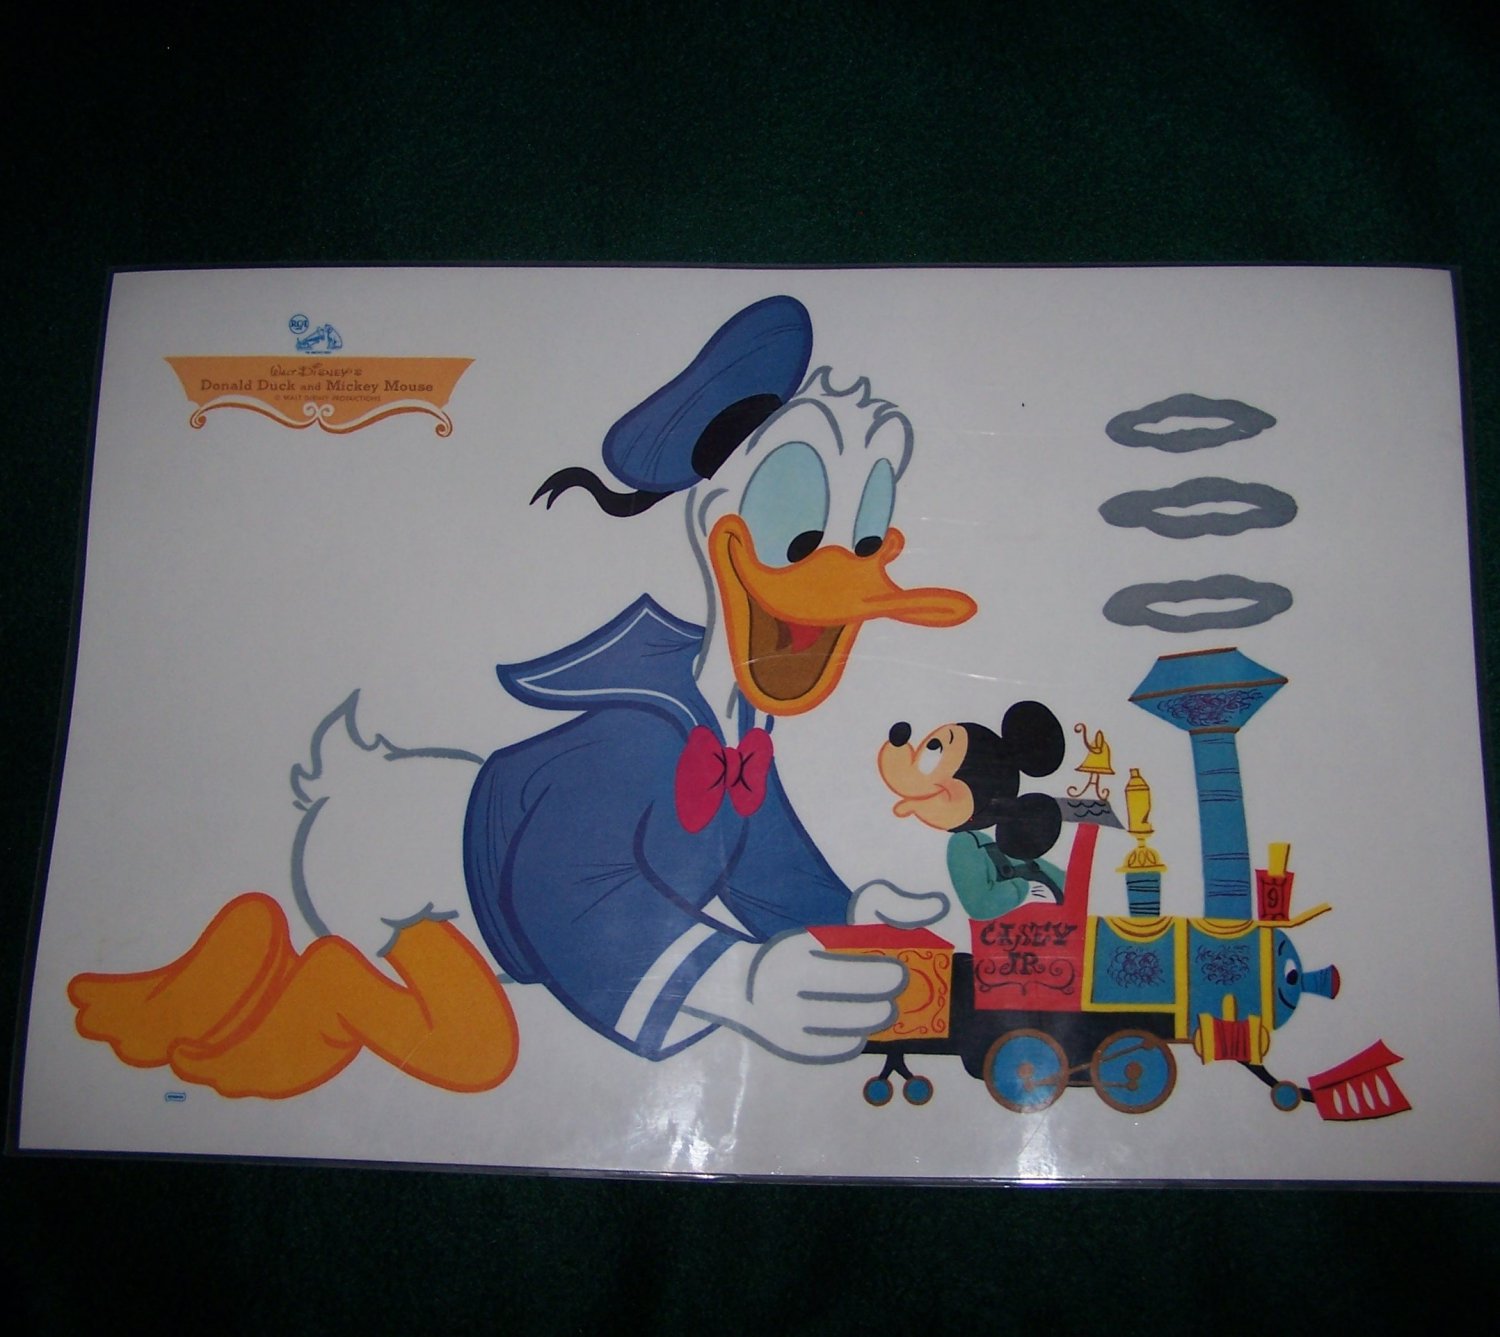 VINTAGE 1964 DISNEY CHARACTERS RCA VICTOR TV PROMO PLACEMATS LAMINATED